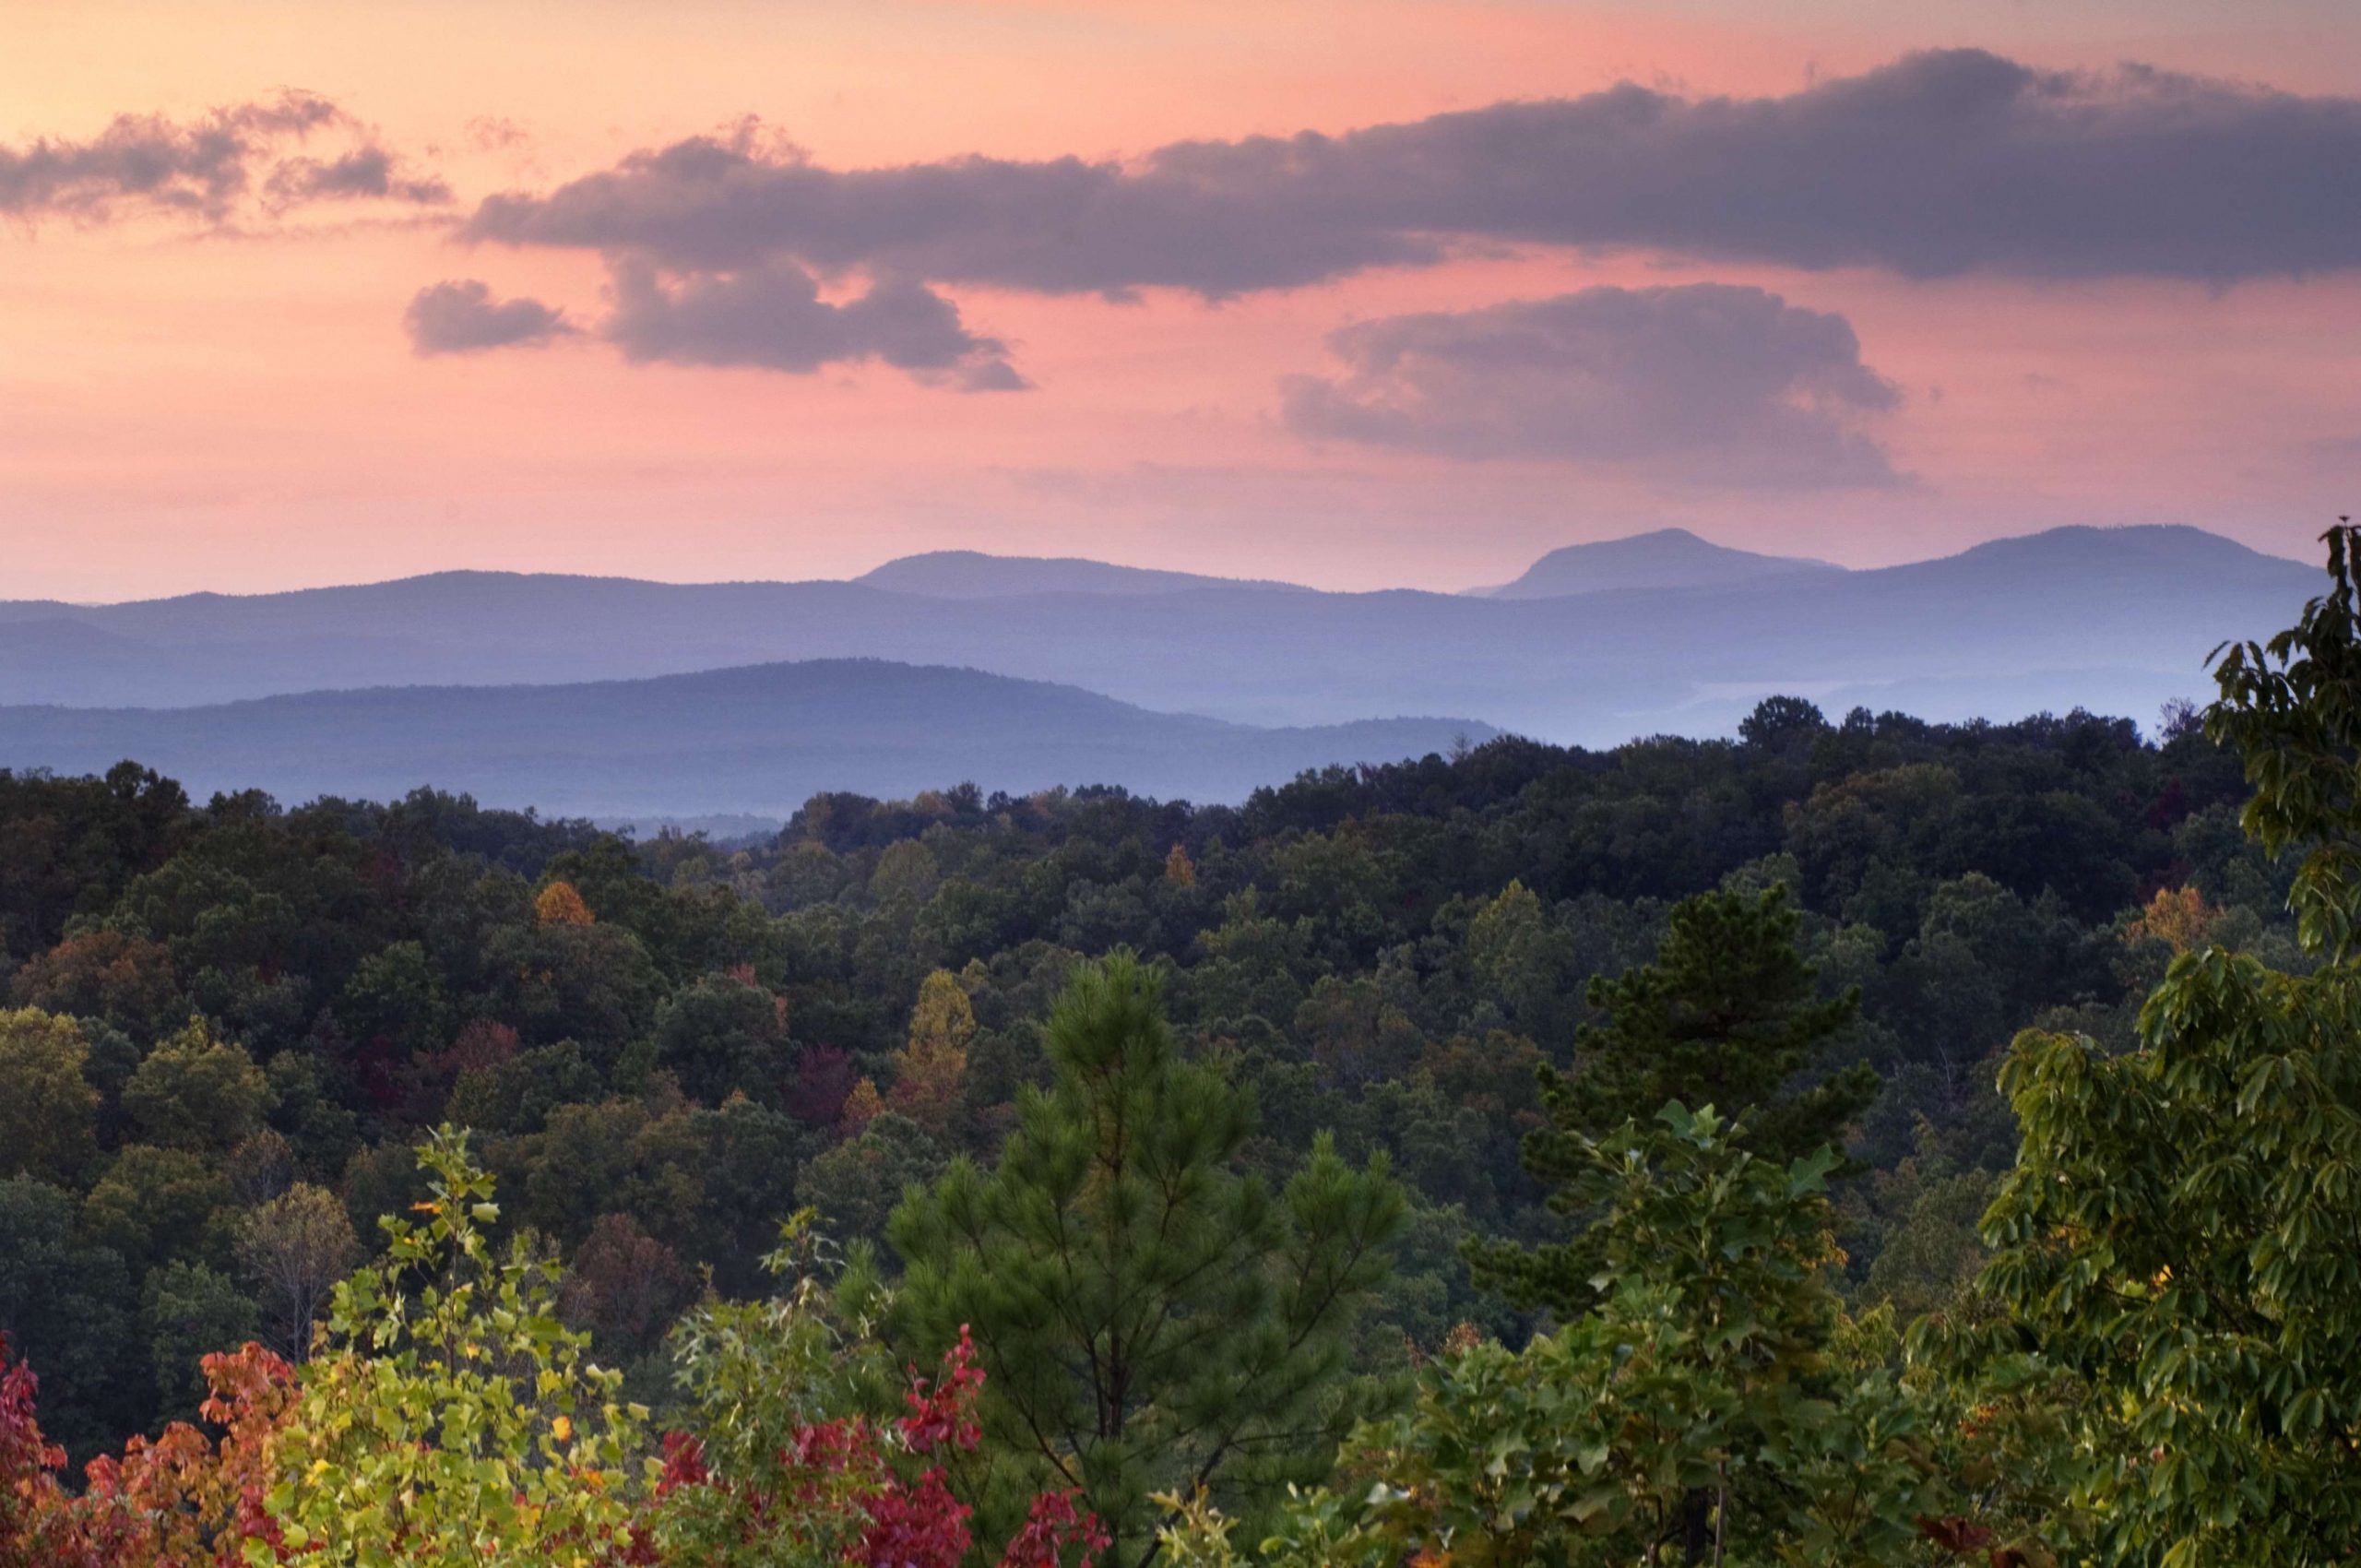 The Greenville area also offers beautiful Blue Ridge Mountain views. This picture shows the mountains from The Reserve at Lake Keowee.